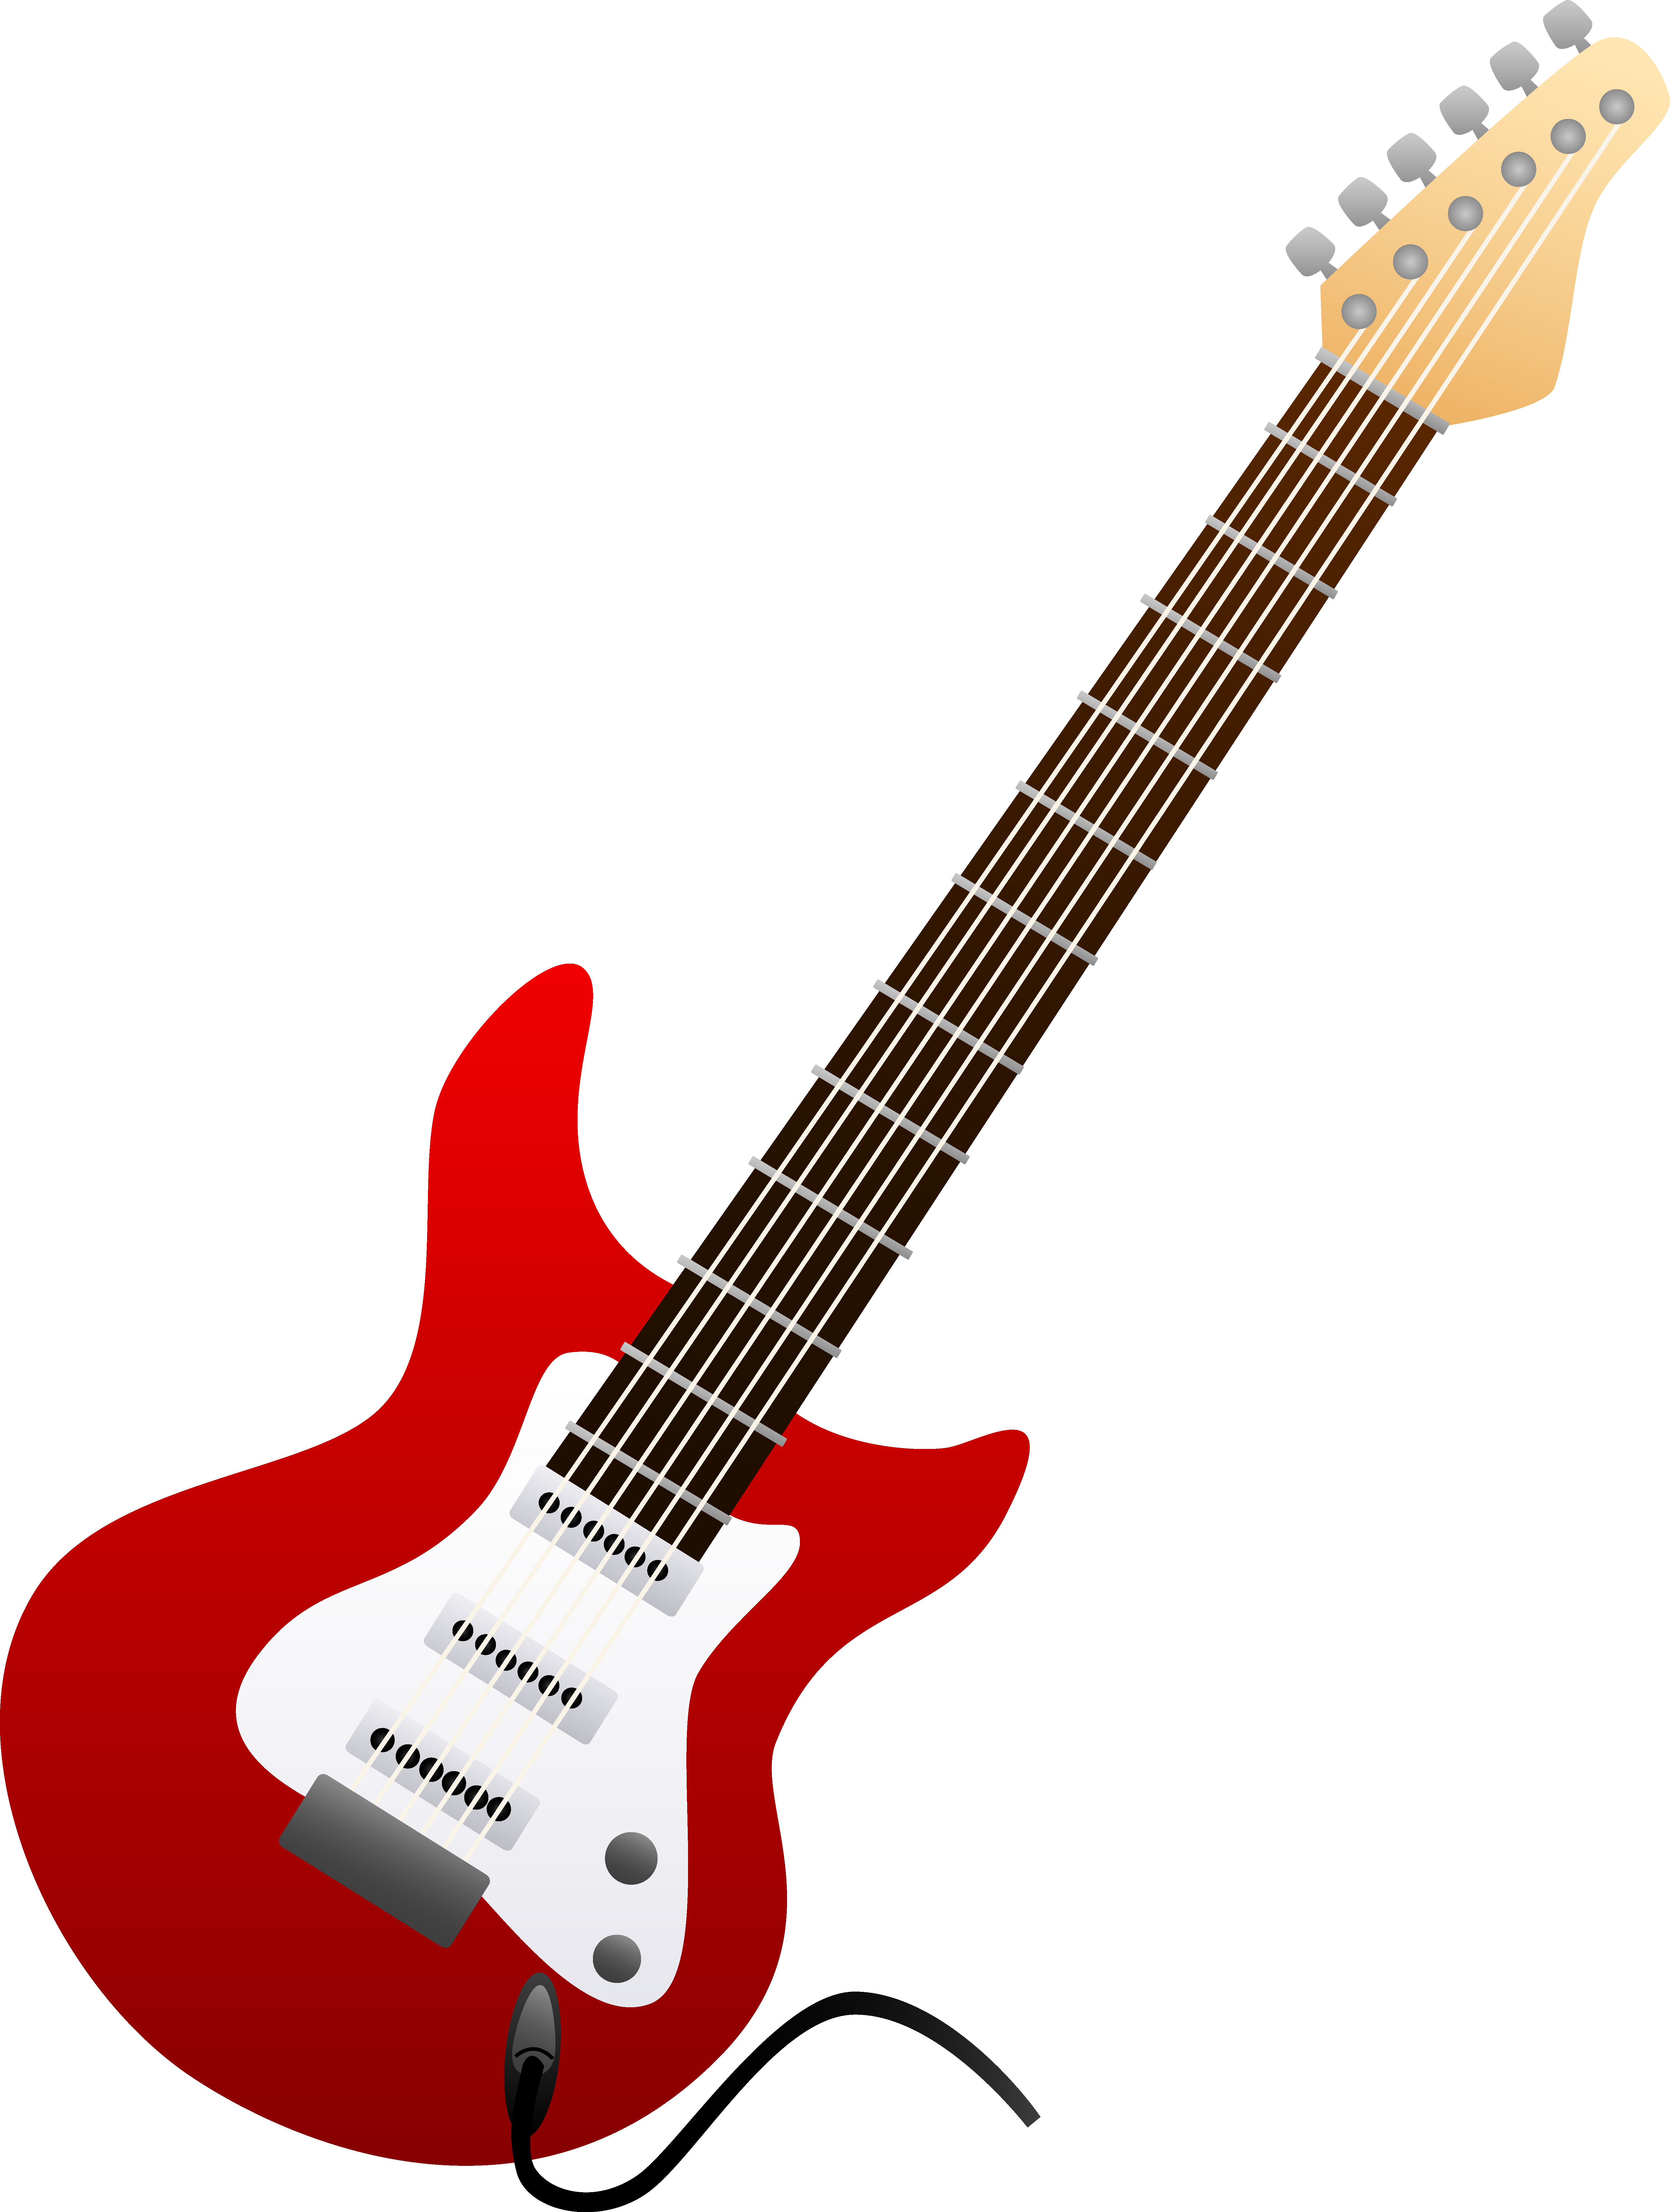 Guitar Clip Art Image | Clipart library - Free Clipart Images